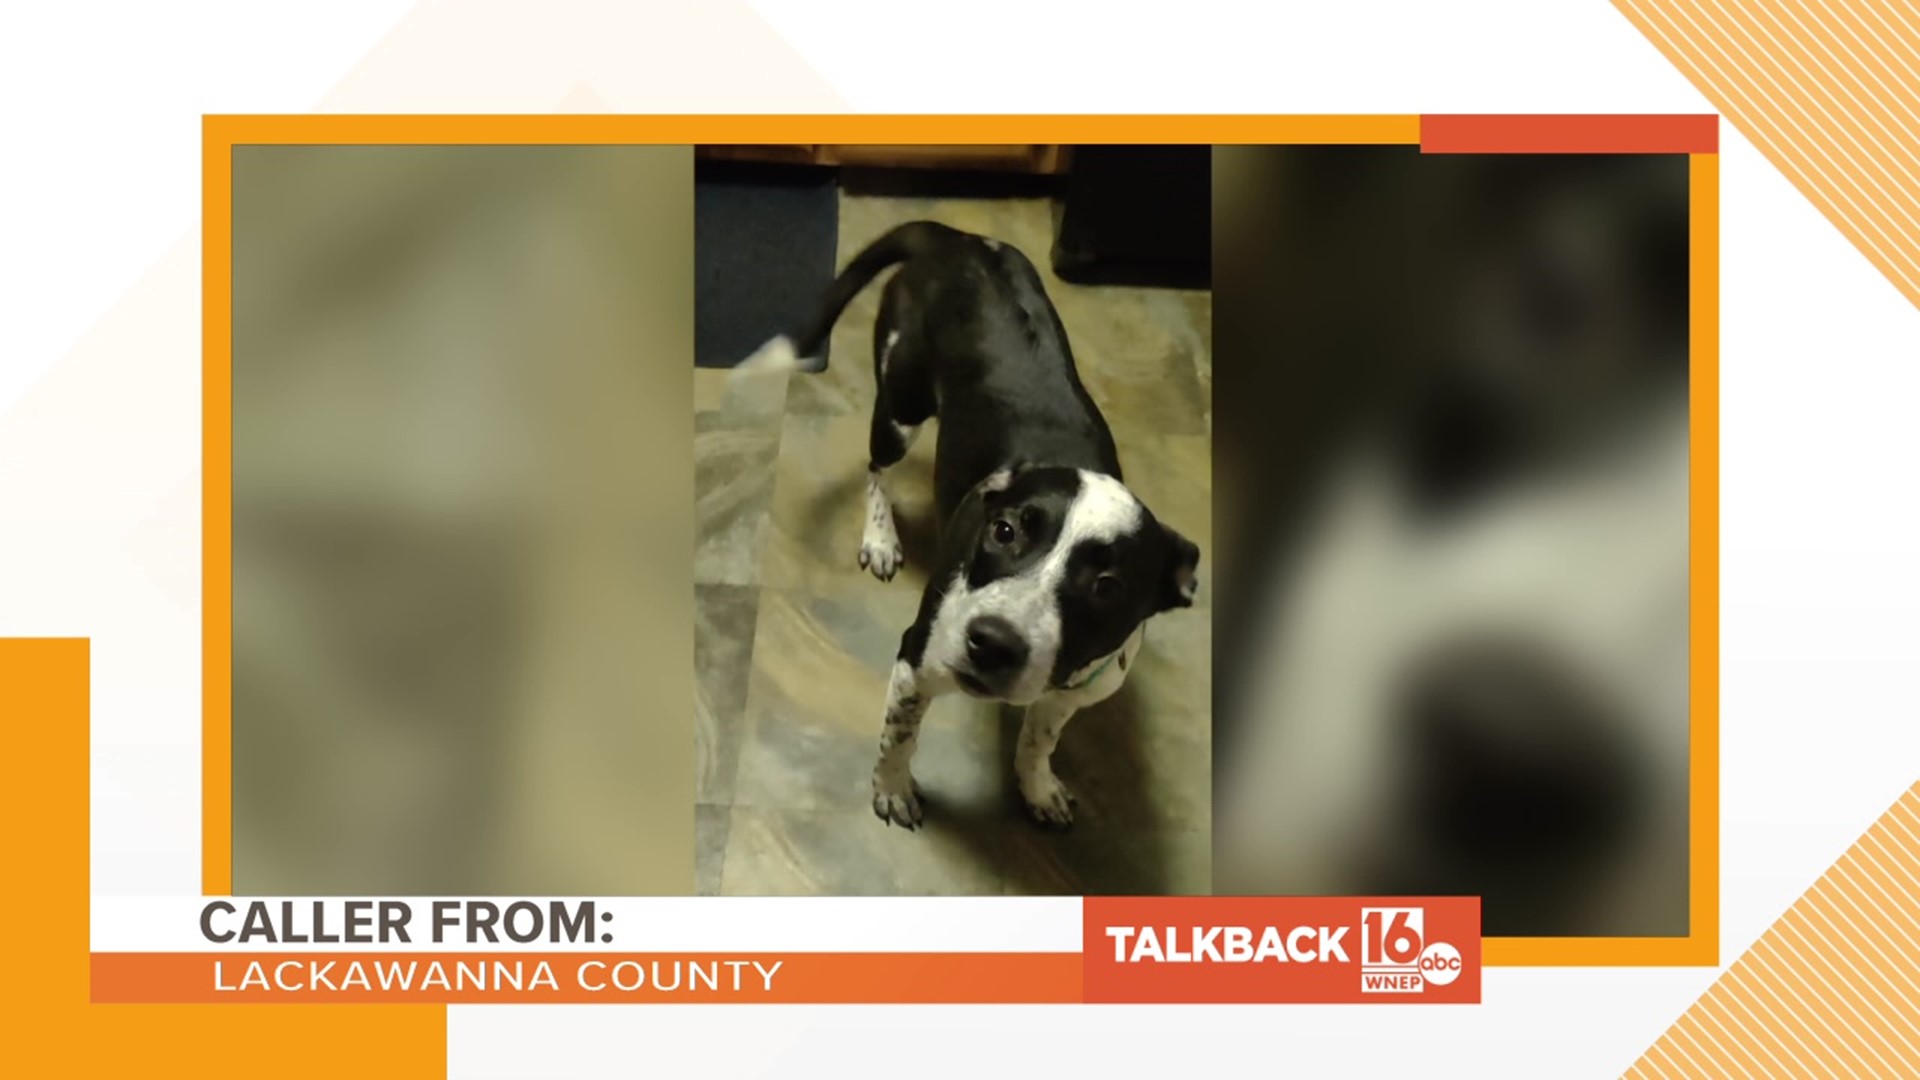 Many callers are upset that a dog was abandoned on the side of a road.